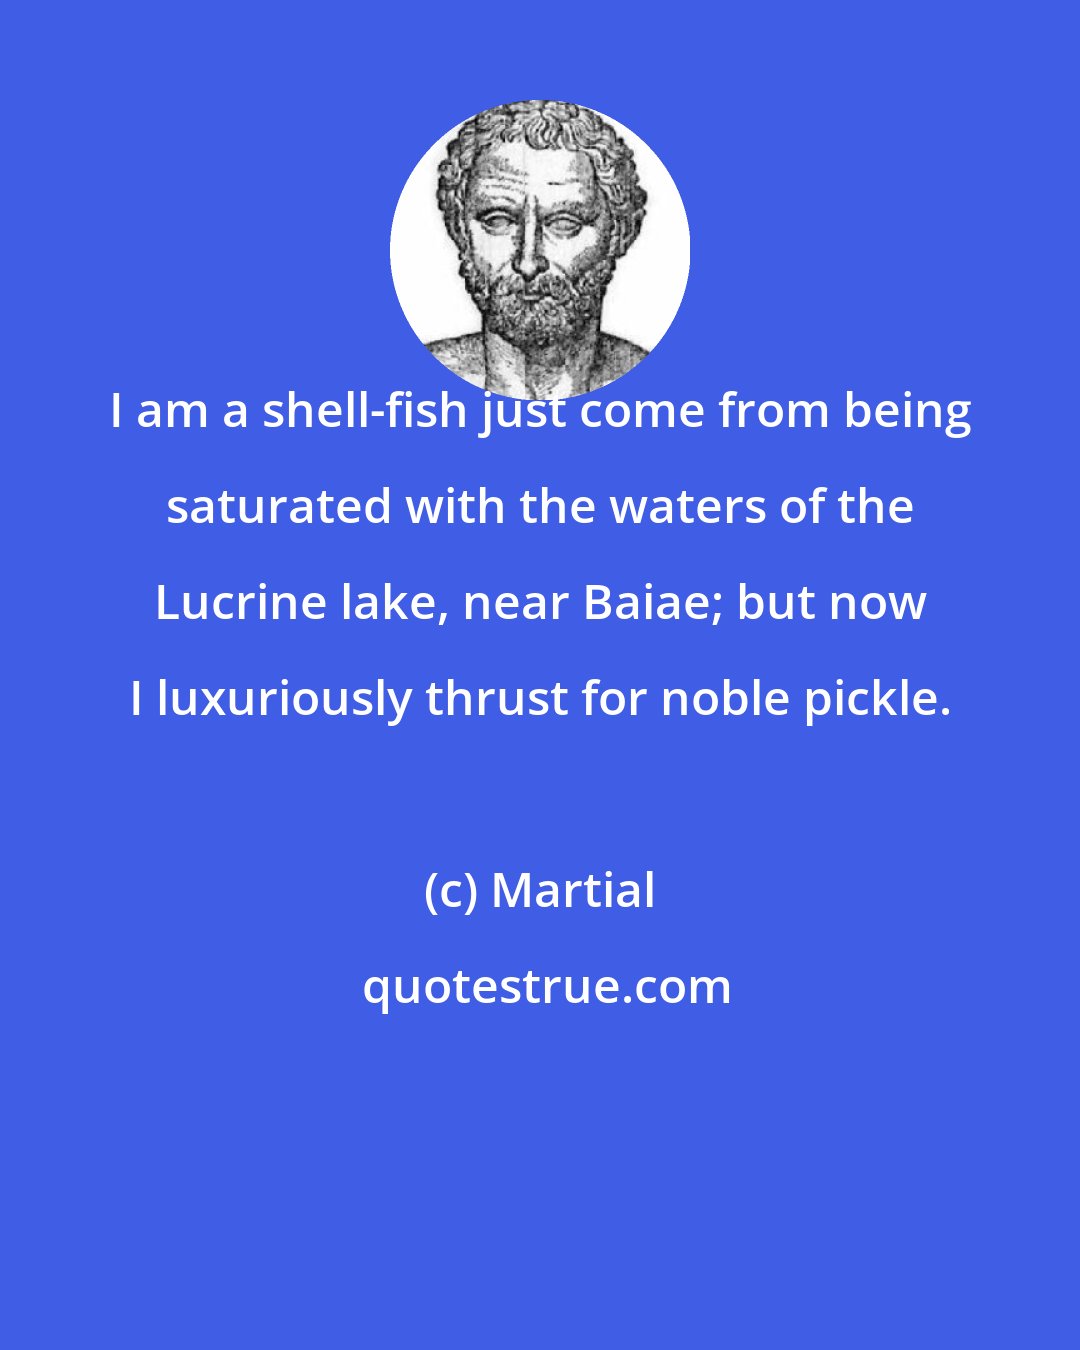 Martial: I am a shell-fish just come from being saturated with the waters of the Lucrine lake, near Baiae; but now I luxuriously thrust for noble pickle.